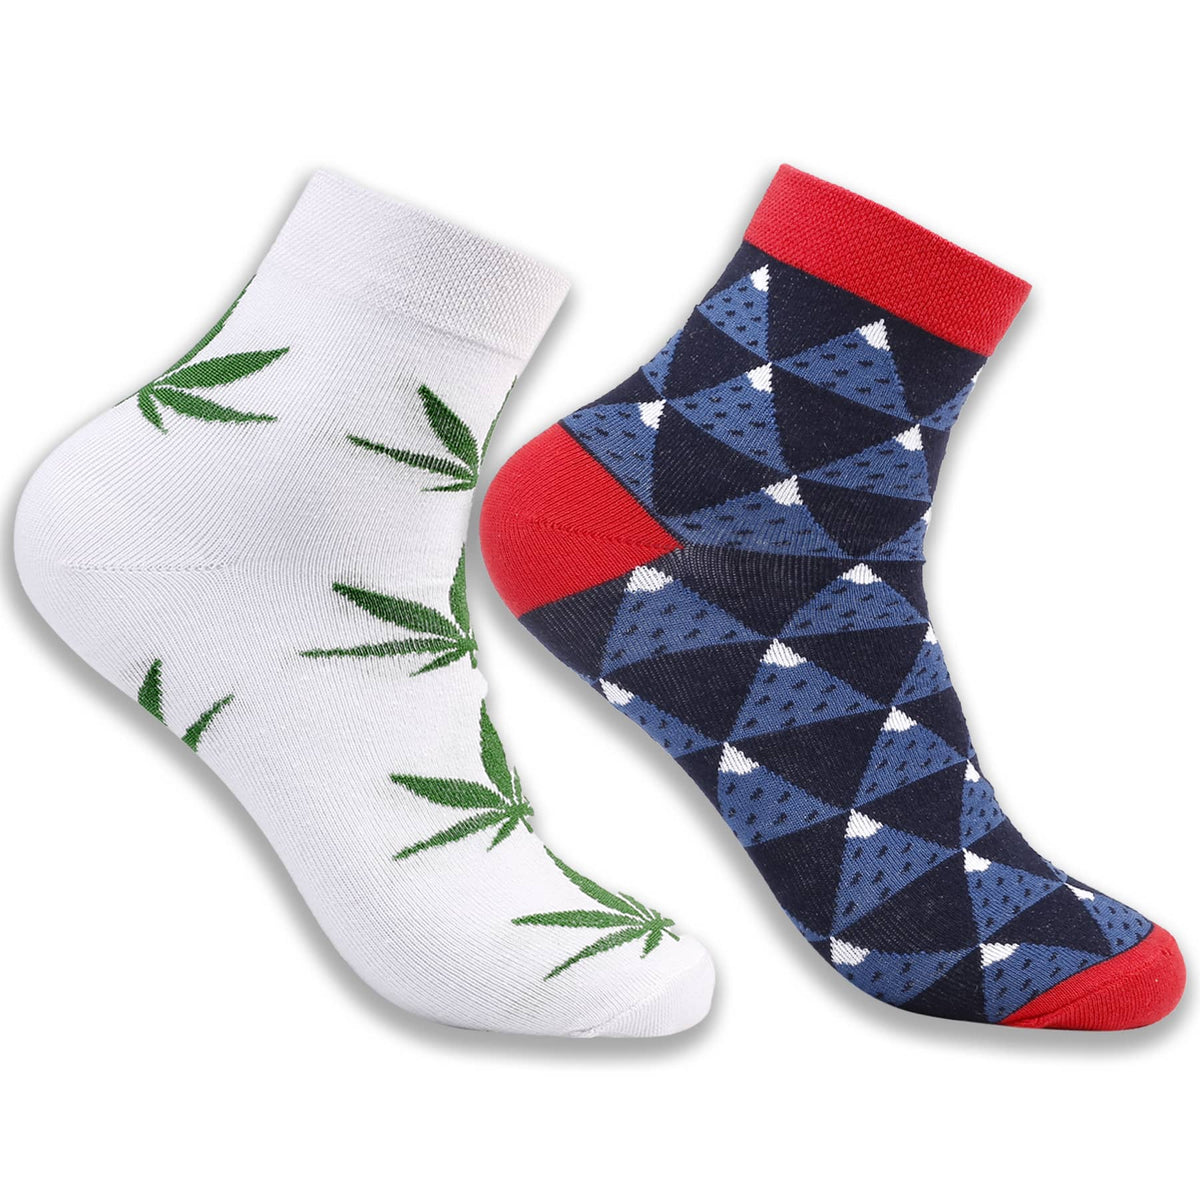 Combo of a 2 Pair Ankle Length comfort Socks